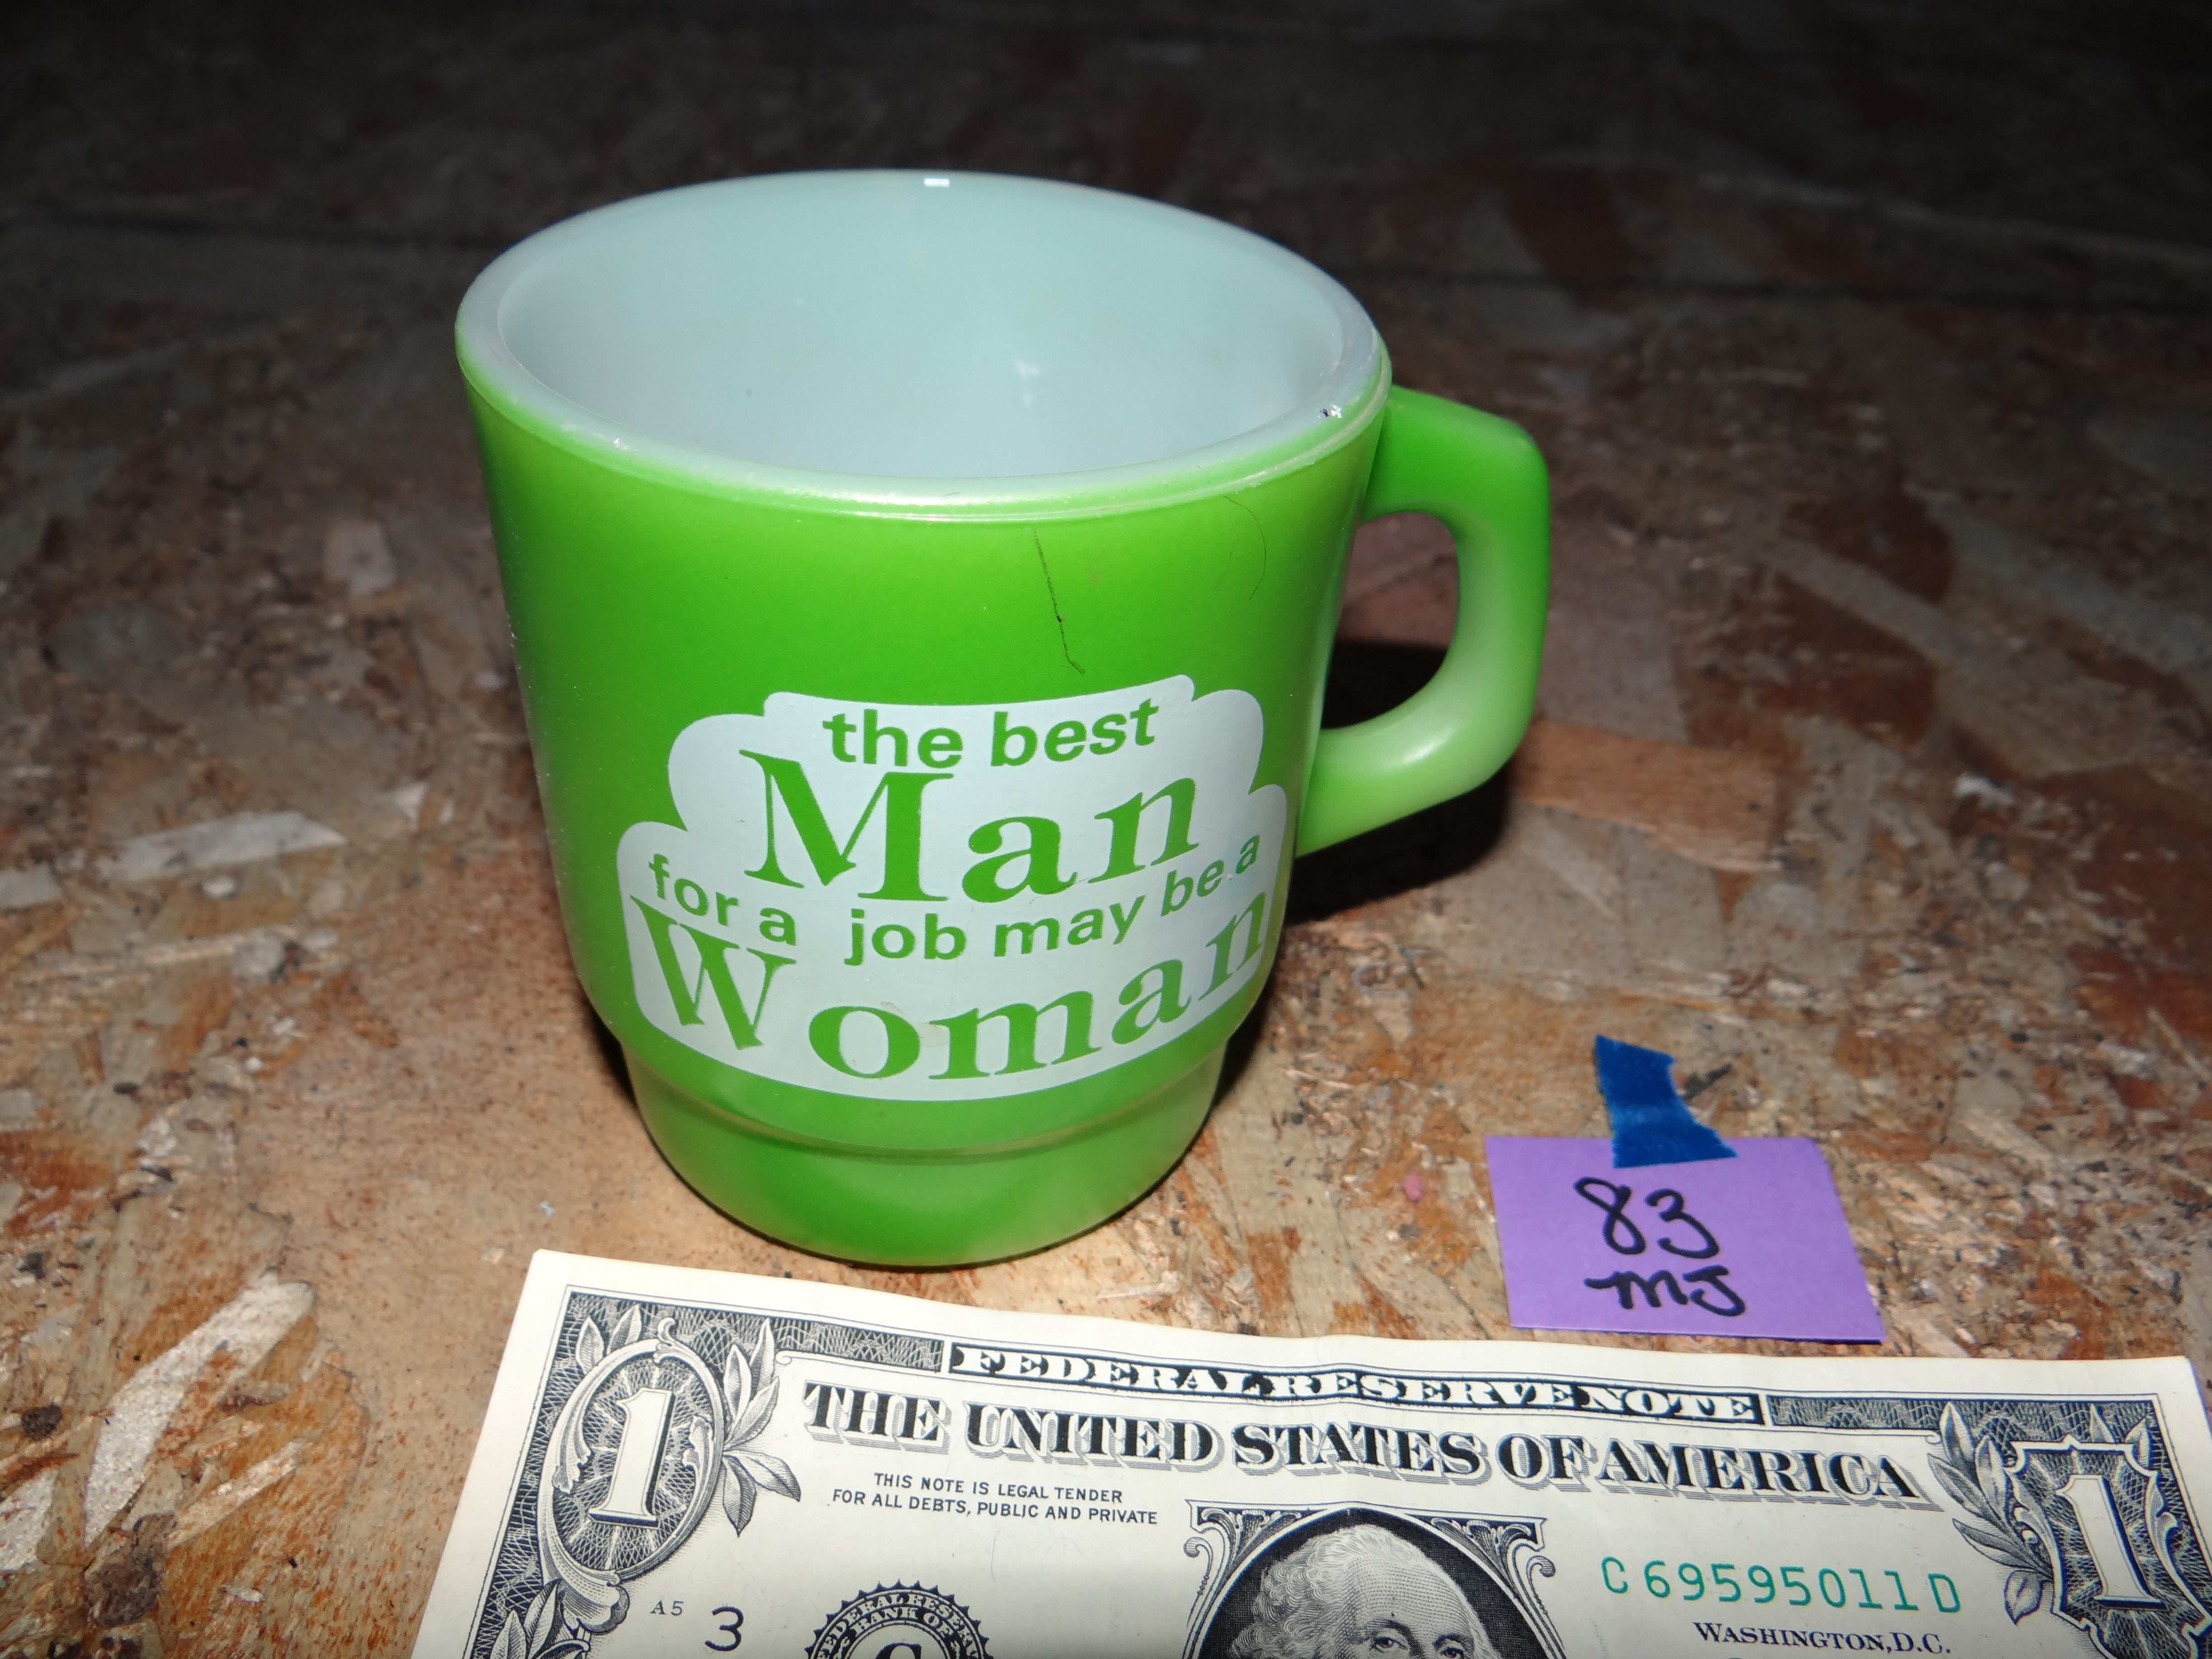 MJ83-'The Best Man For A Job MAy Be A Woman' Vintage Coffee Cup